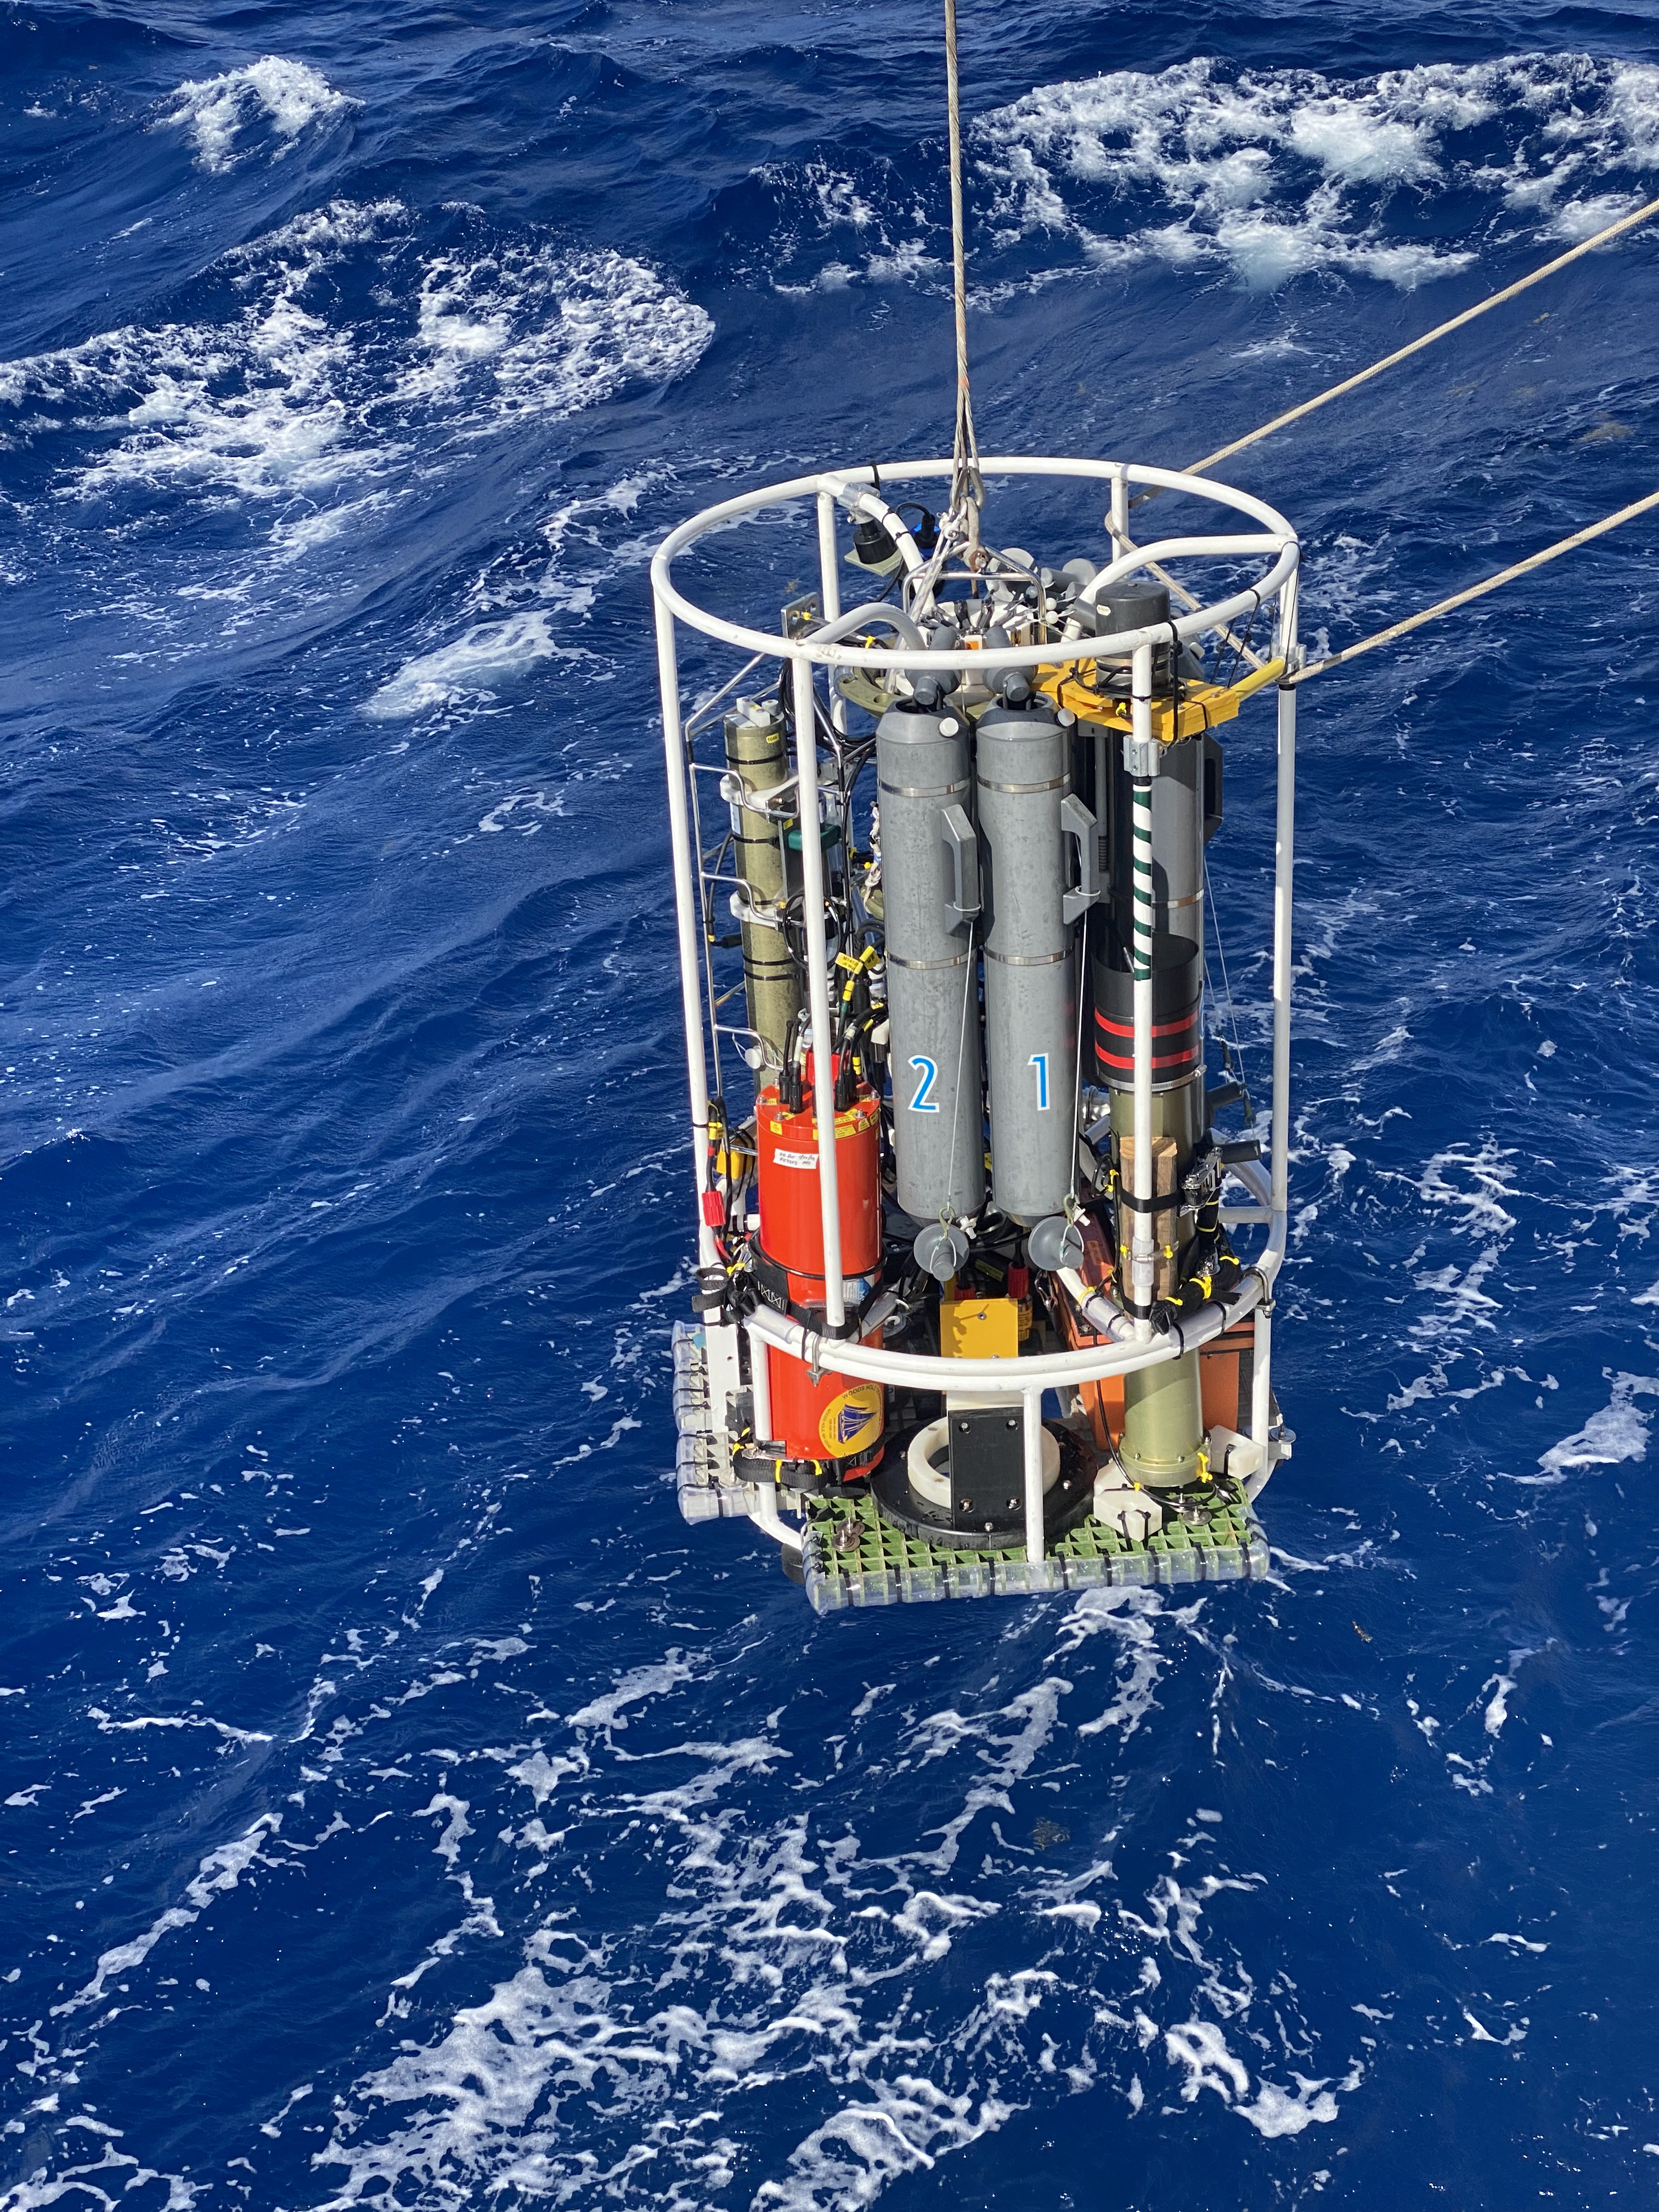 The conductivity, temperature, and depth (CTD) rosette is lowered into the ocean for the second deep-sea camera engineering test of the 2022 Puerto Rico Mapping and Deep-Sea Camera Demonstration.